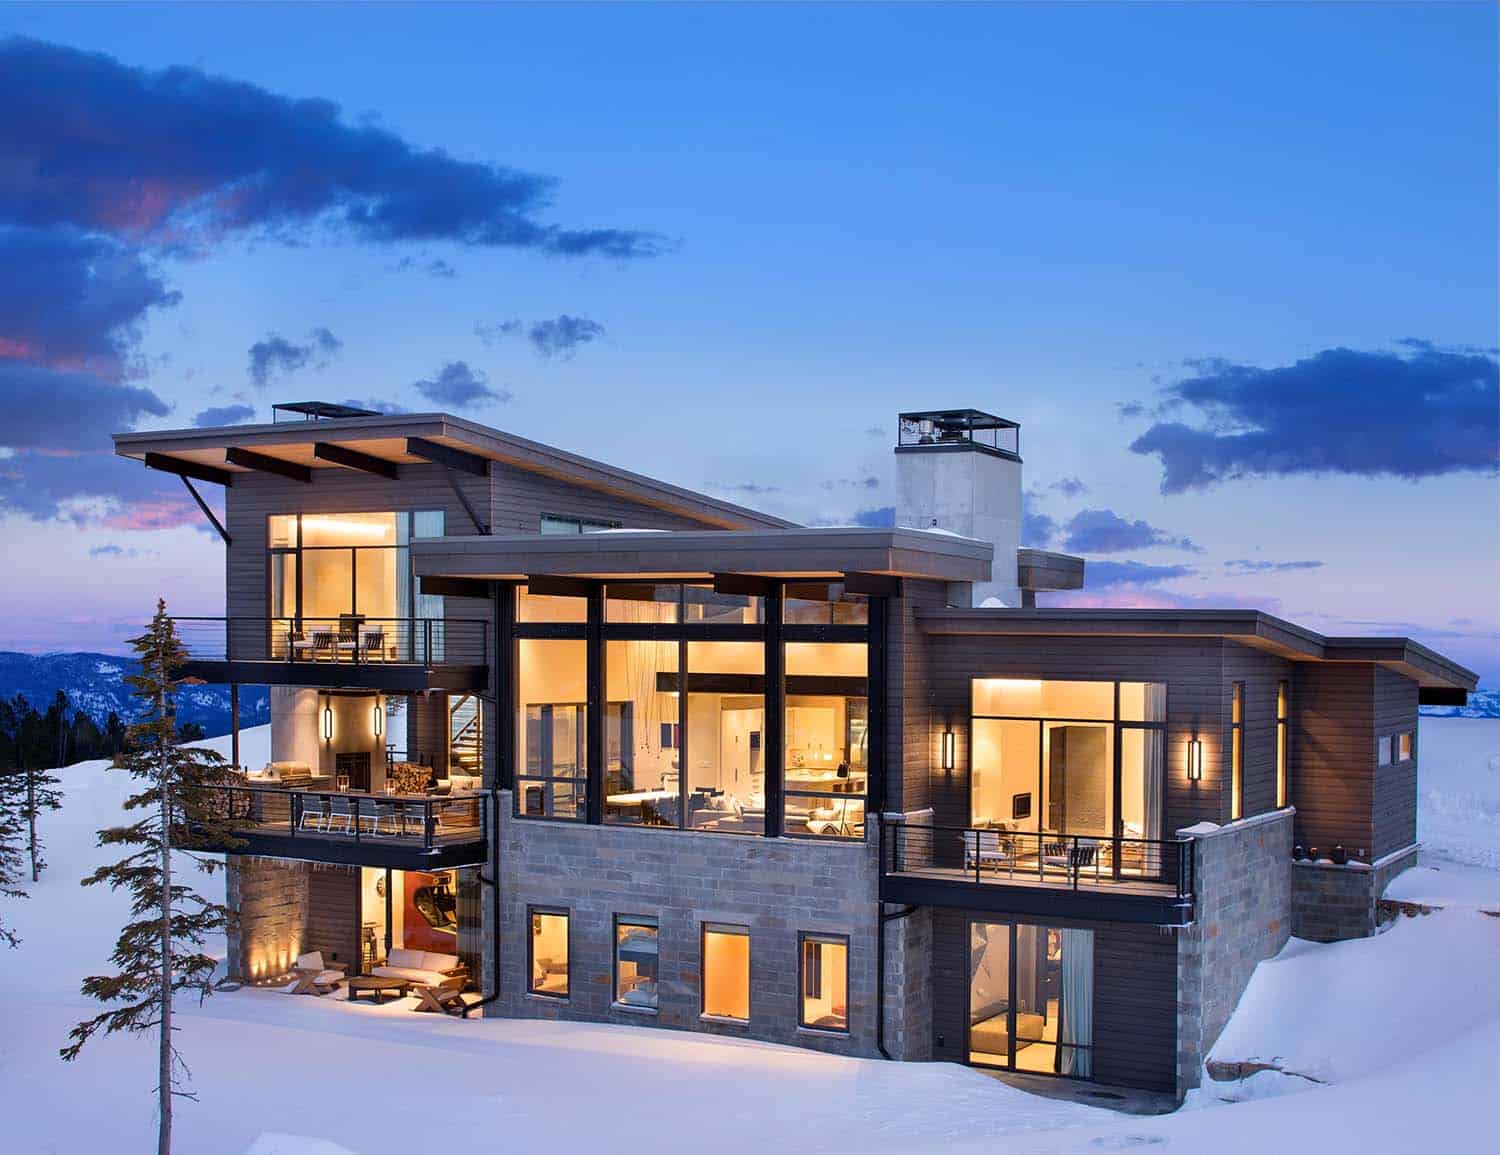 Modern mountain home boasts chic and stylish living in Montana